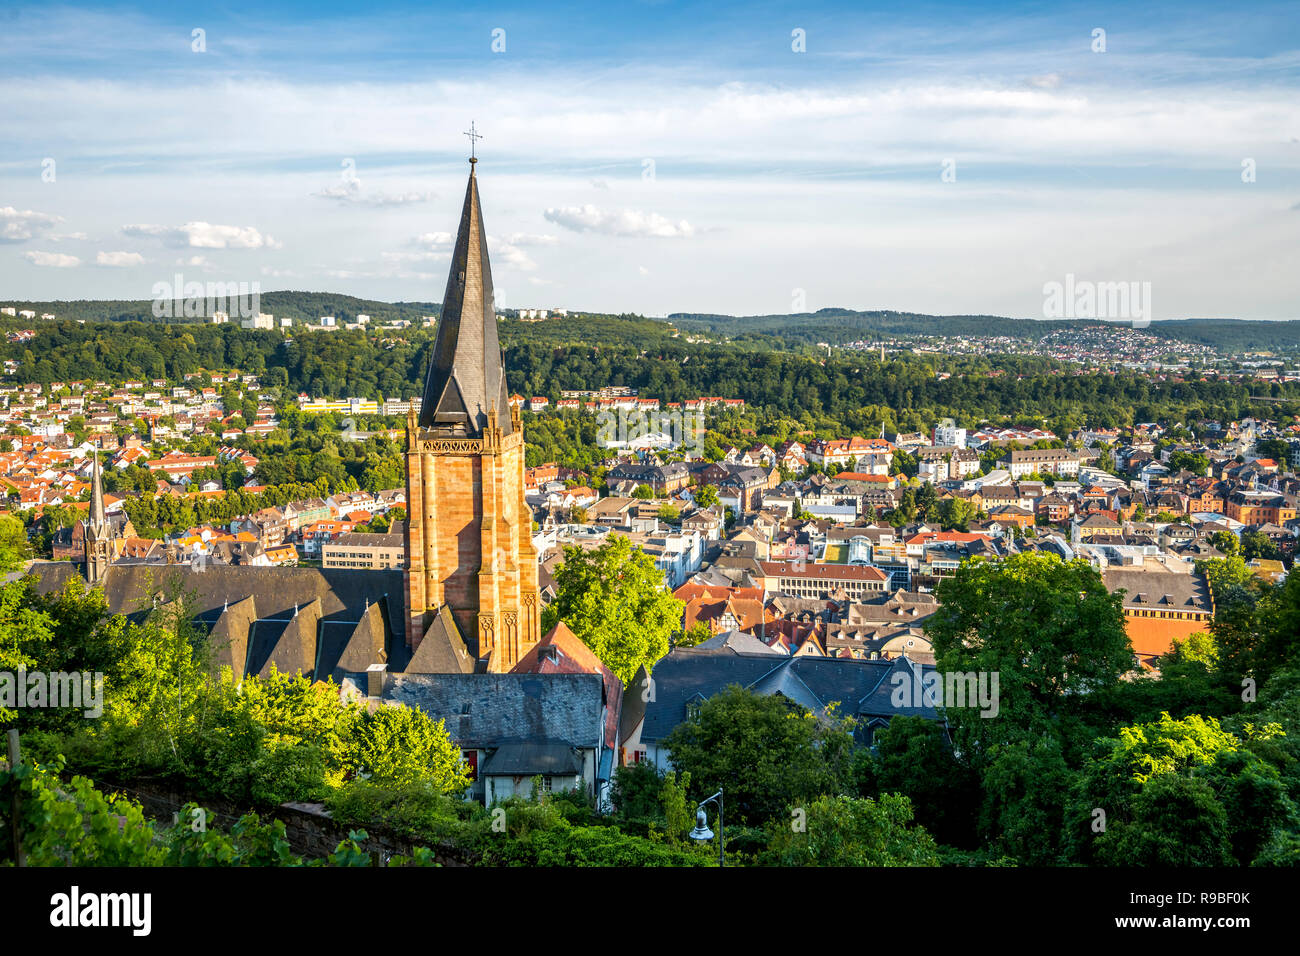 View over Marburg an der Lahn, Germany Stock Photo